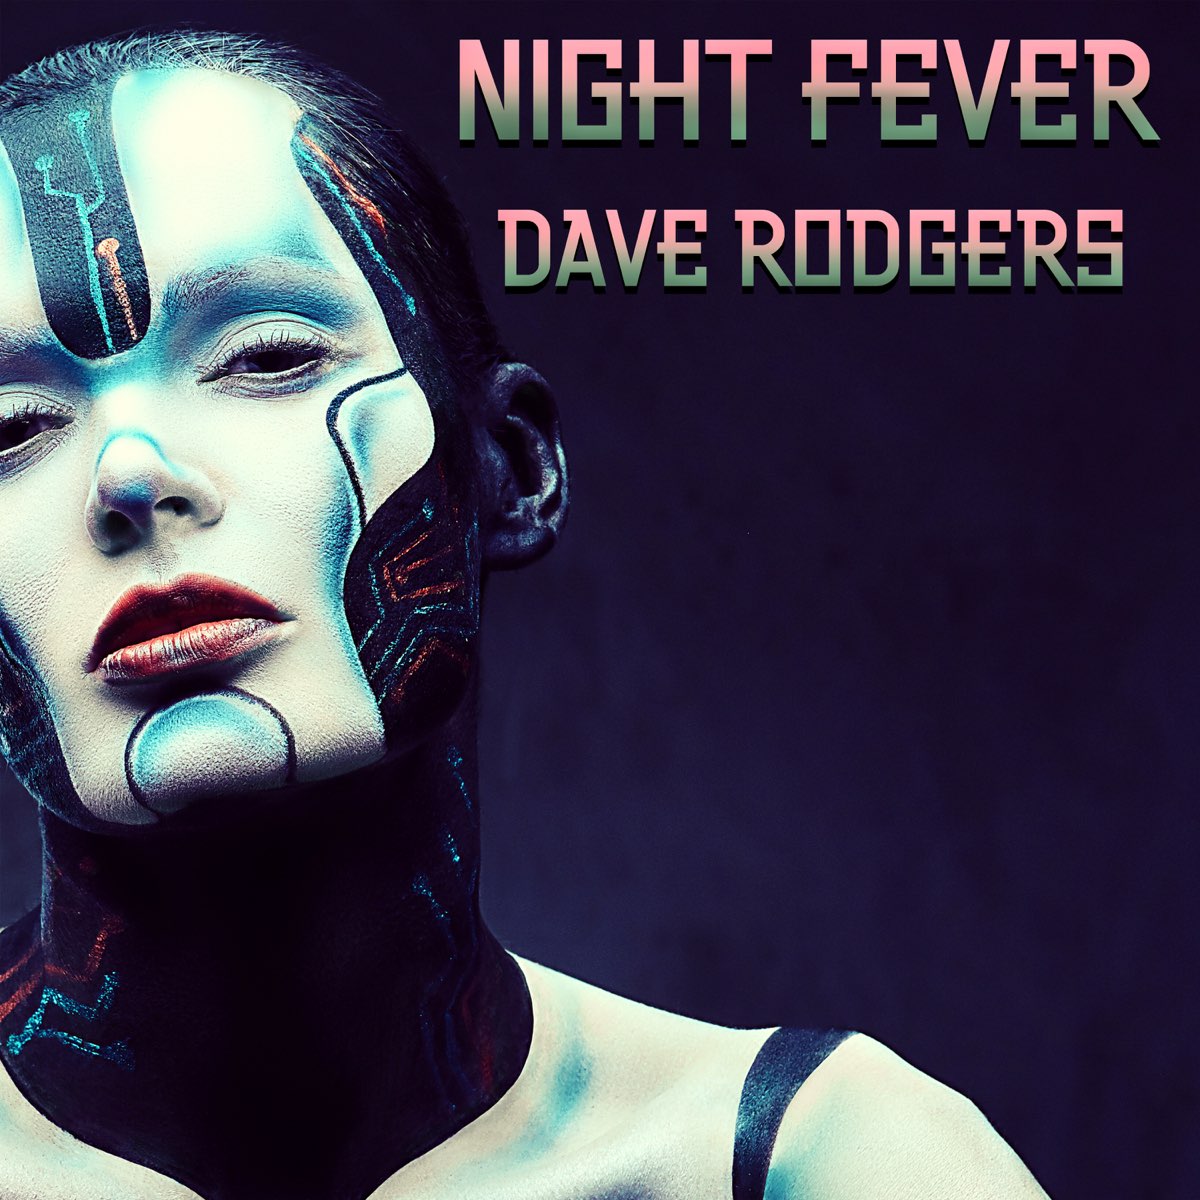 Dave rodgers deja vu. Dave Rodgers. Dave Rodgers Night Fever. Take me higher Dave Rodgers.